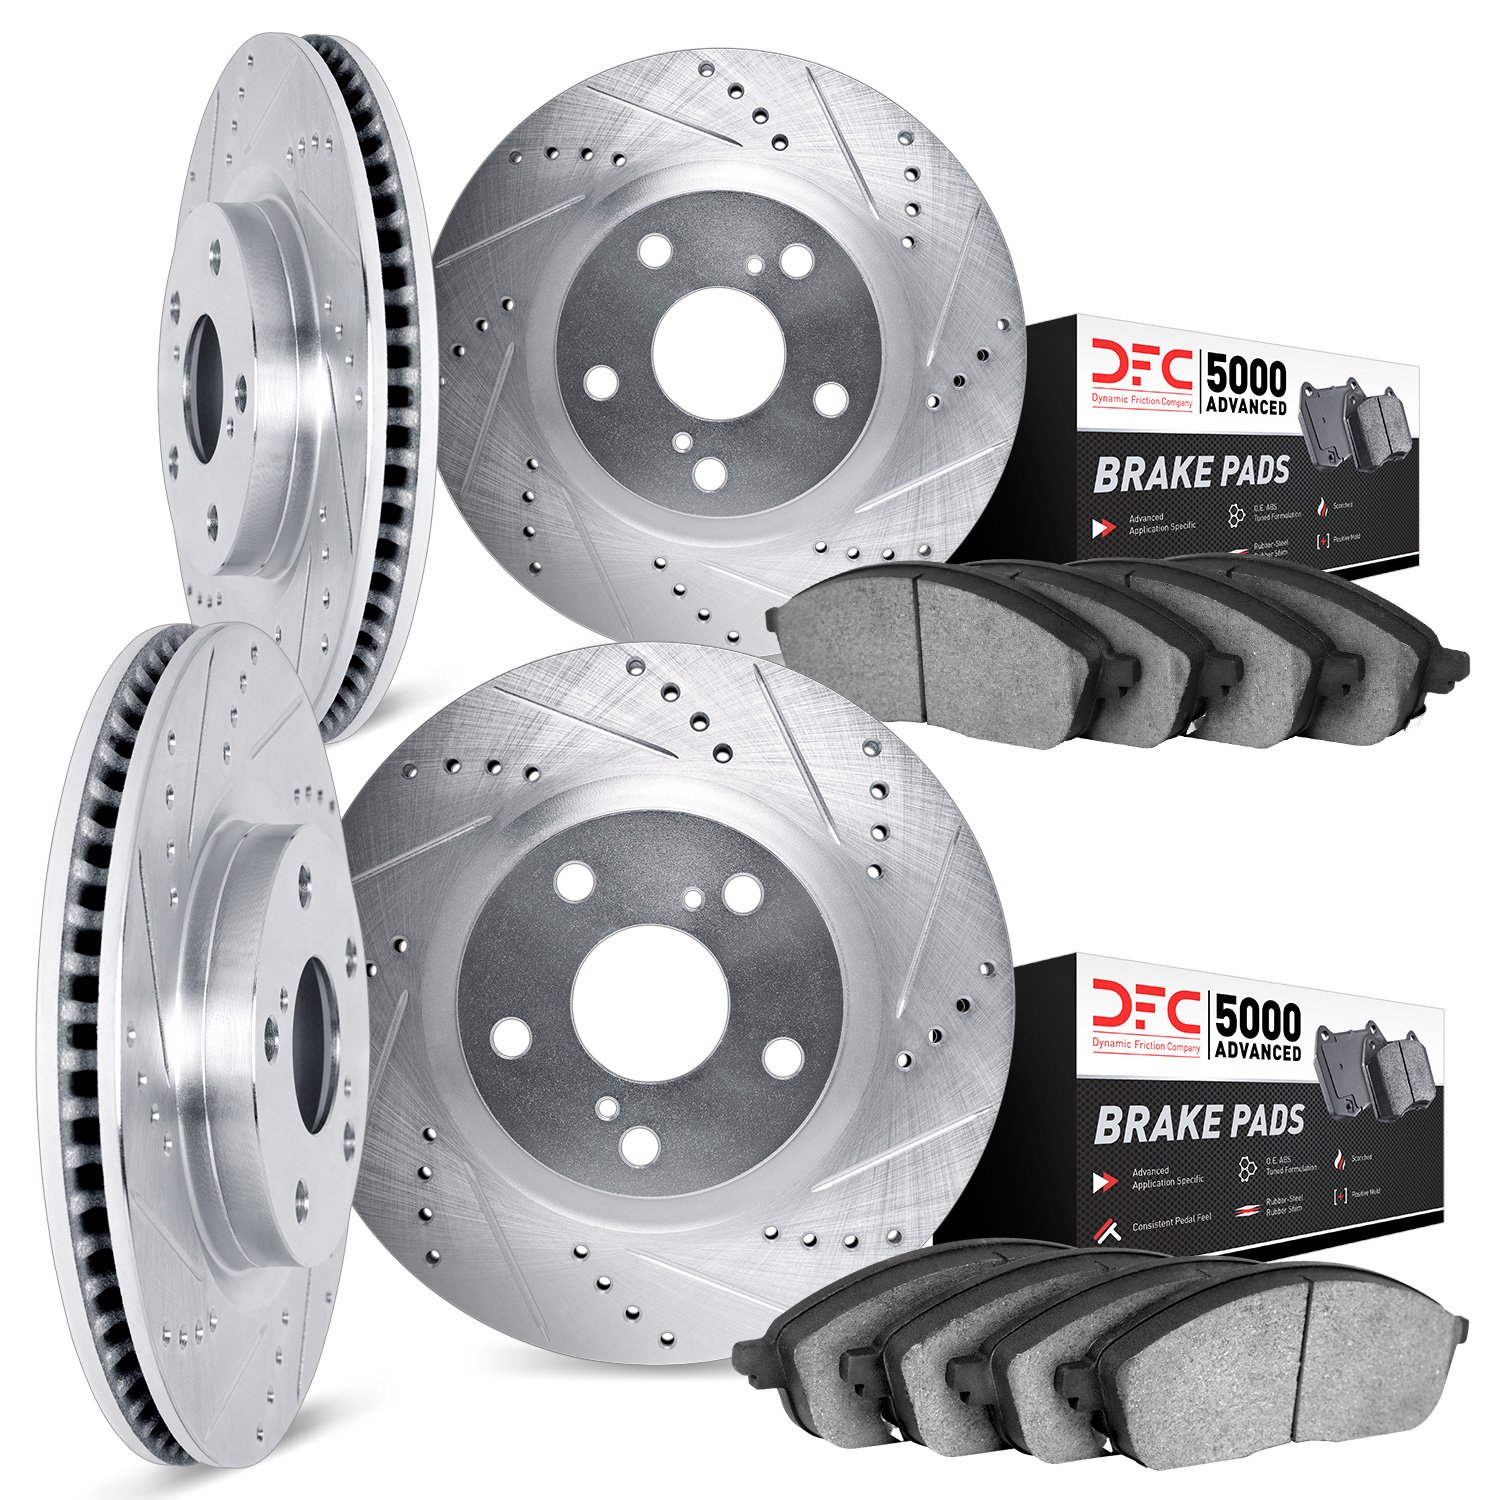 7504-75026 Drilled/Slotted Brake Rotors w/5000 Advanced Brake Pads Kit [Silver], Fits Select Lexus/Toyota/Scion, Position: Front